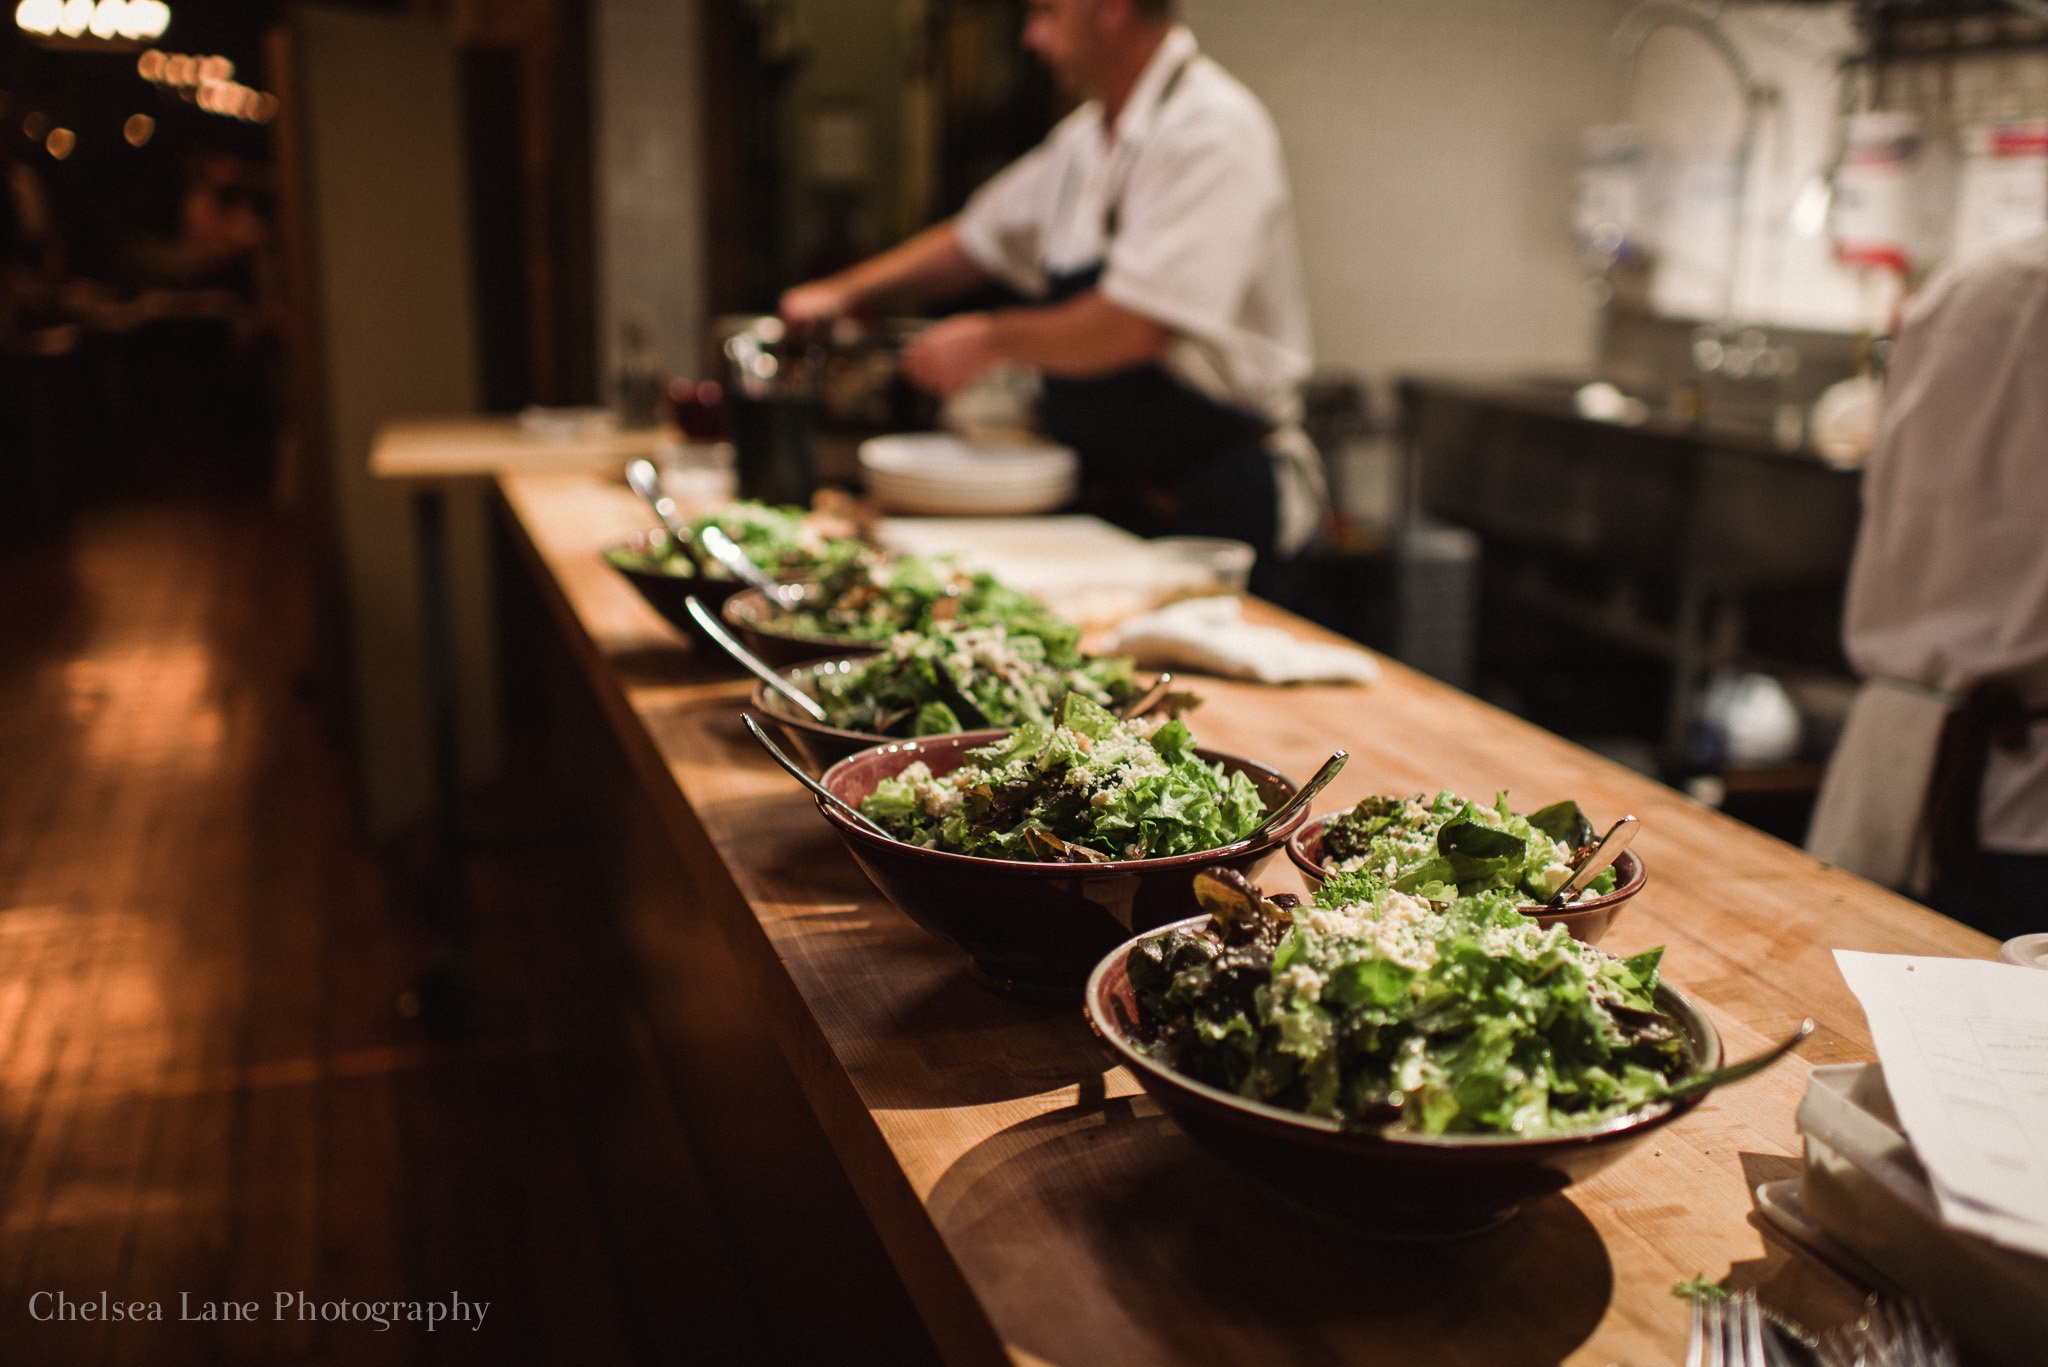 event space_Chelsea Lane Photography_Oct 2016-8.jpg